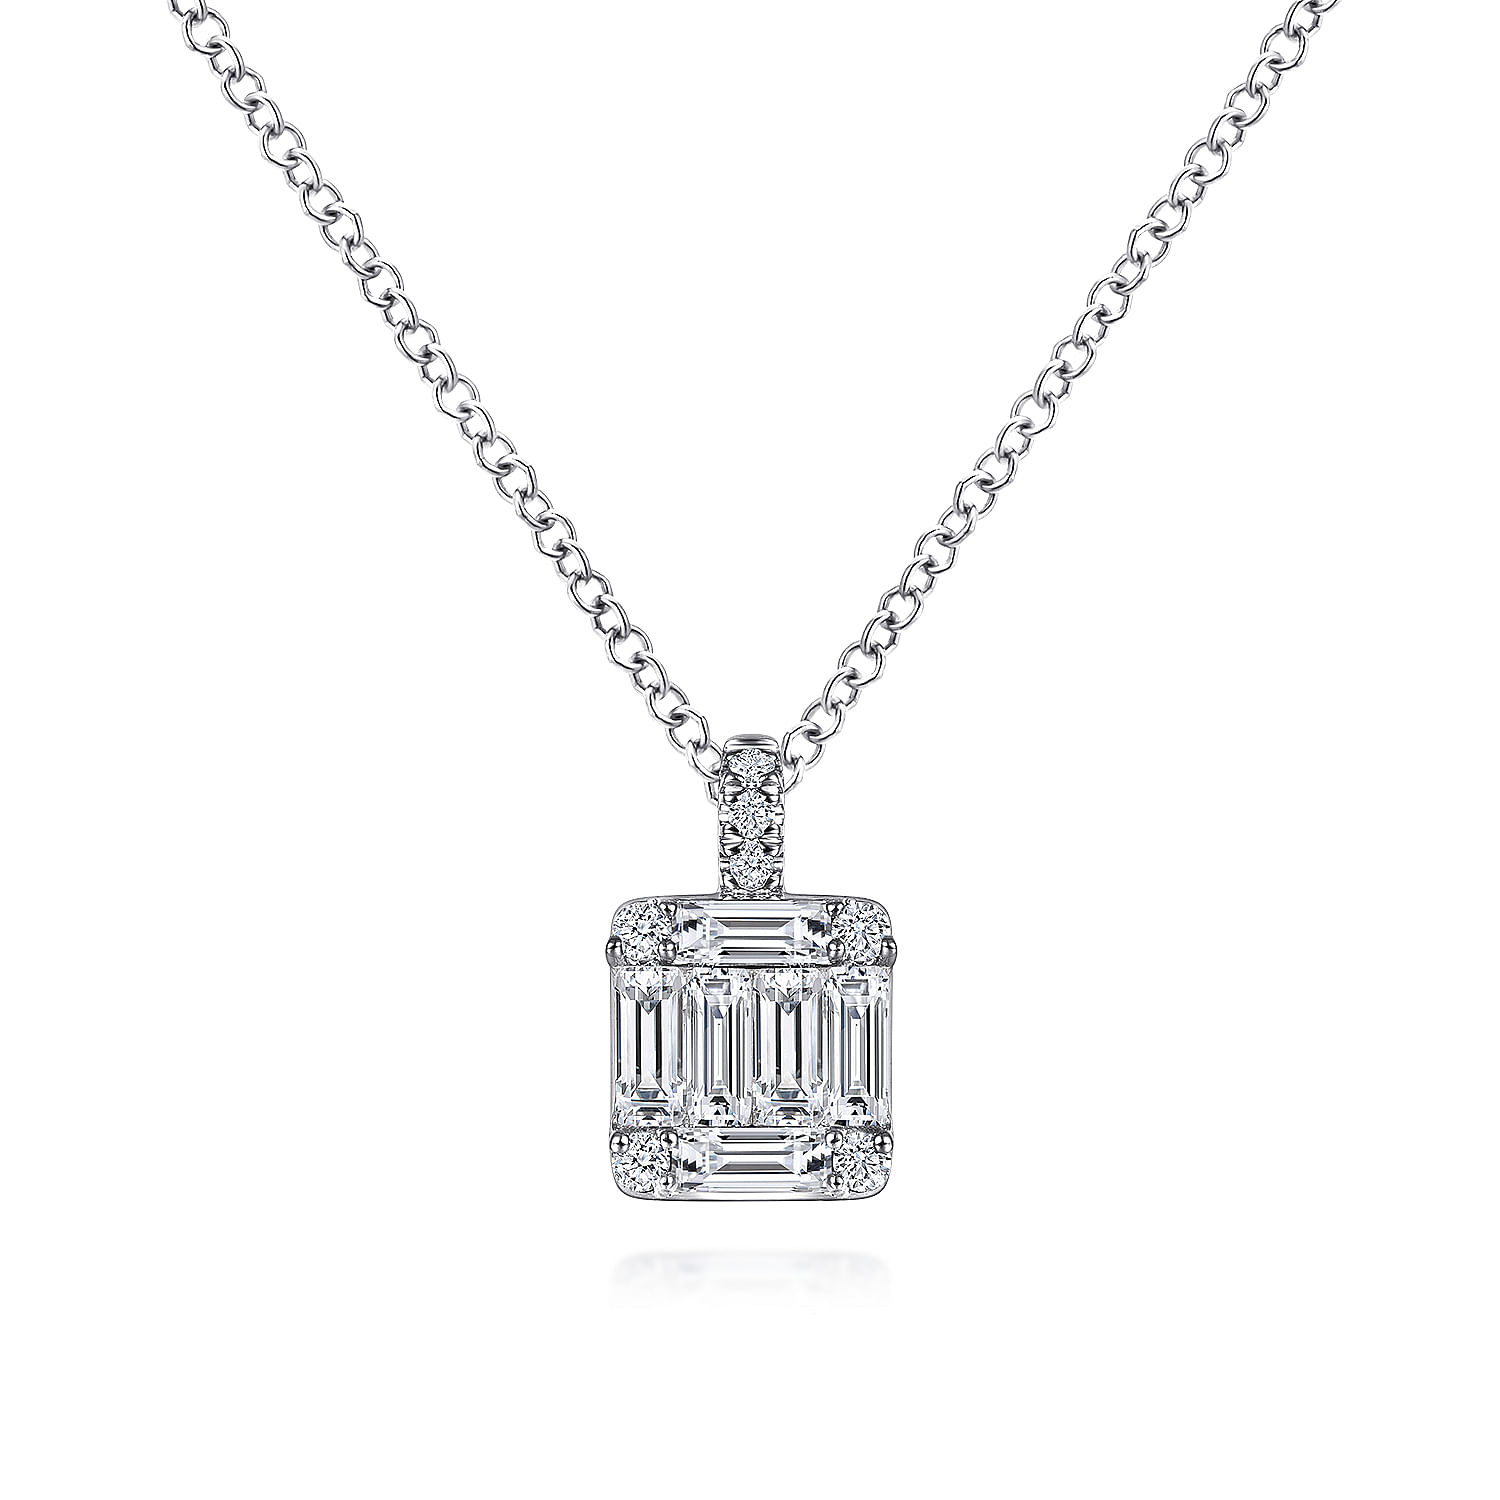 18K White Gold Baguette and Round Diamond Square Pendant Necklace